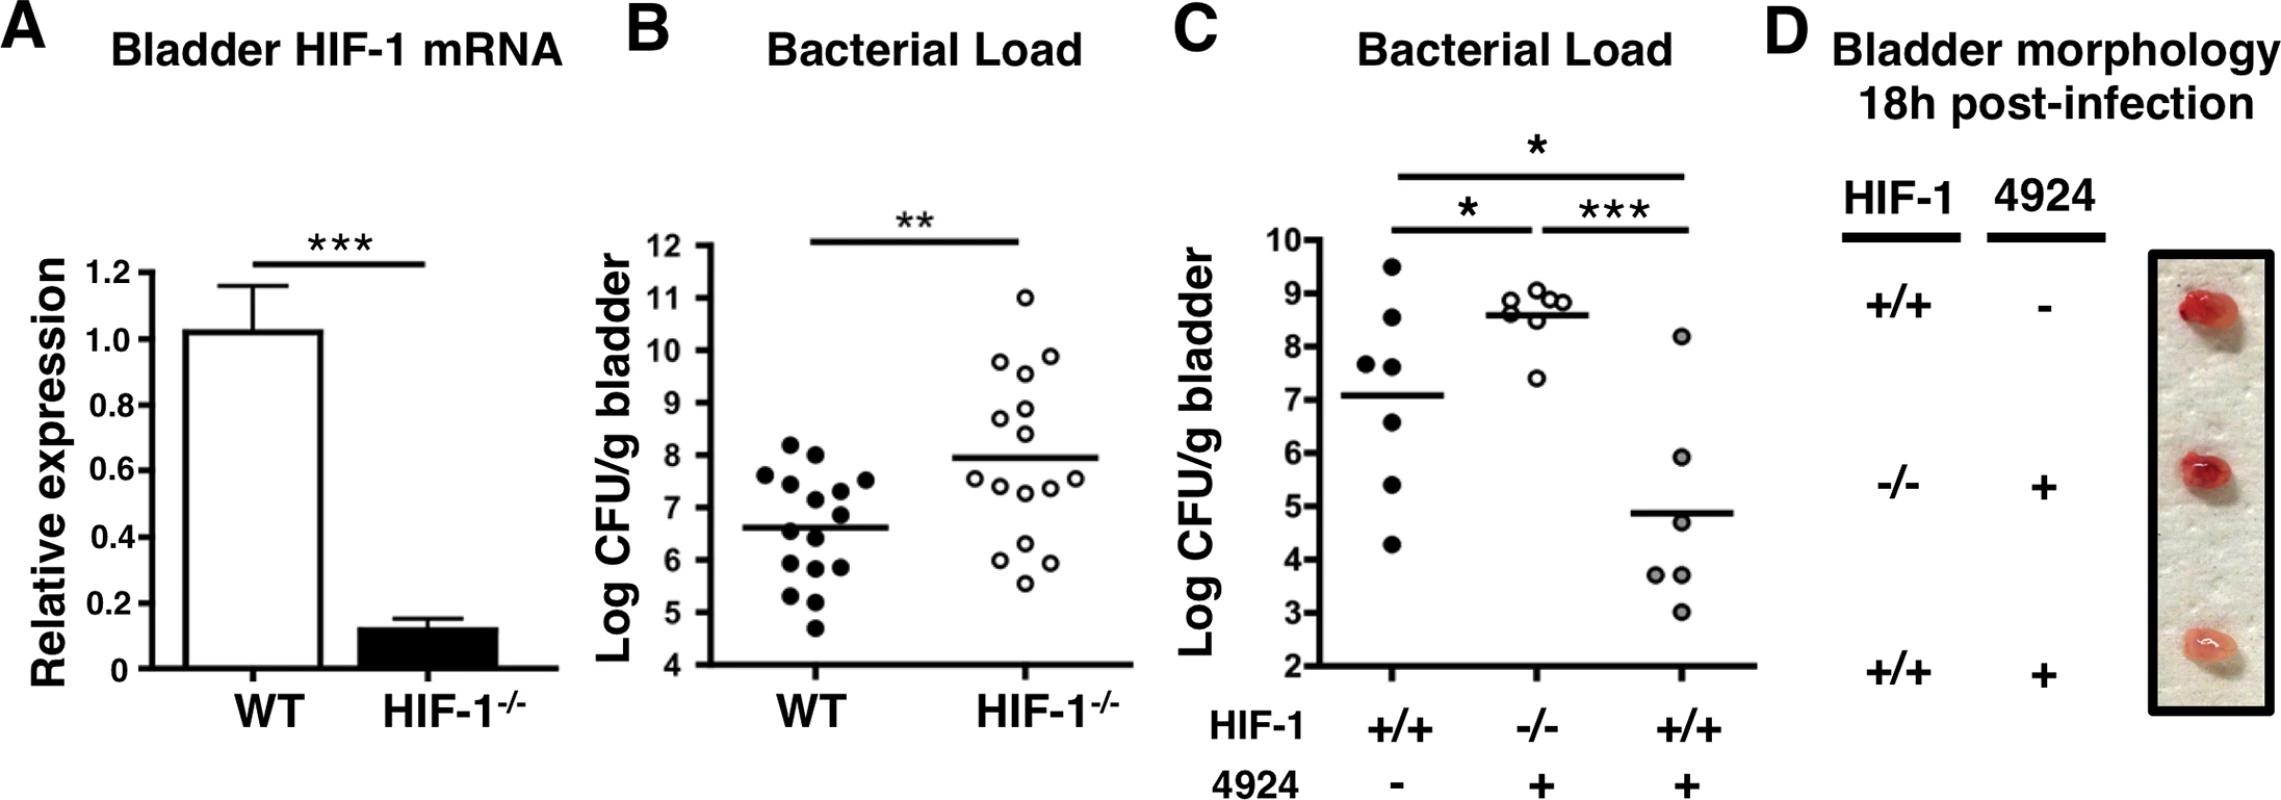 Mice lacking HIF-1 in their bladder epithelium are more susceptible to UPEC urinary tract colonization.